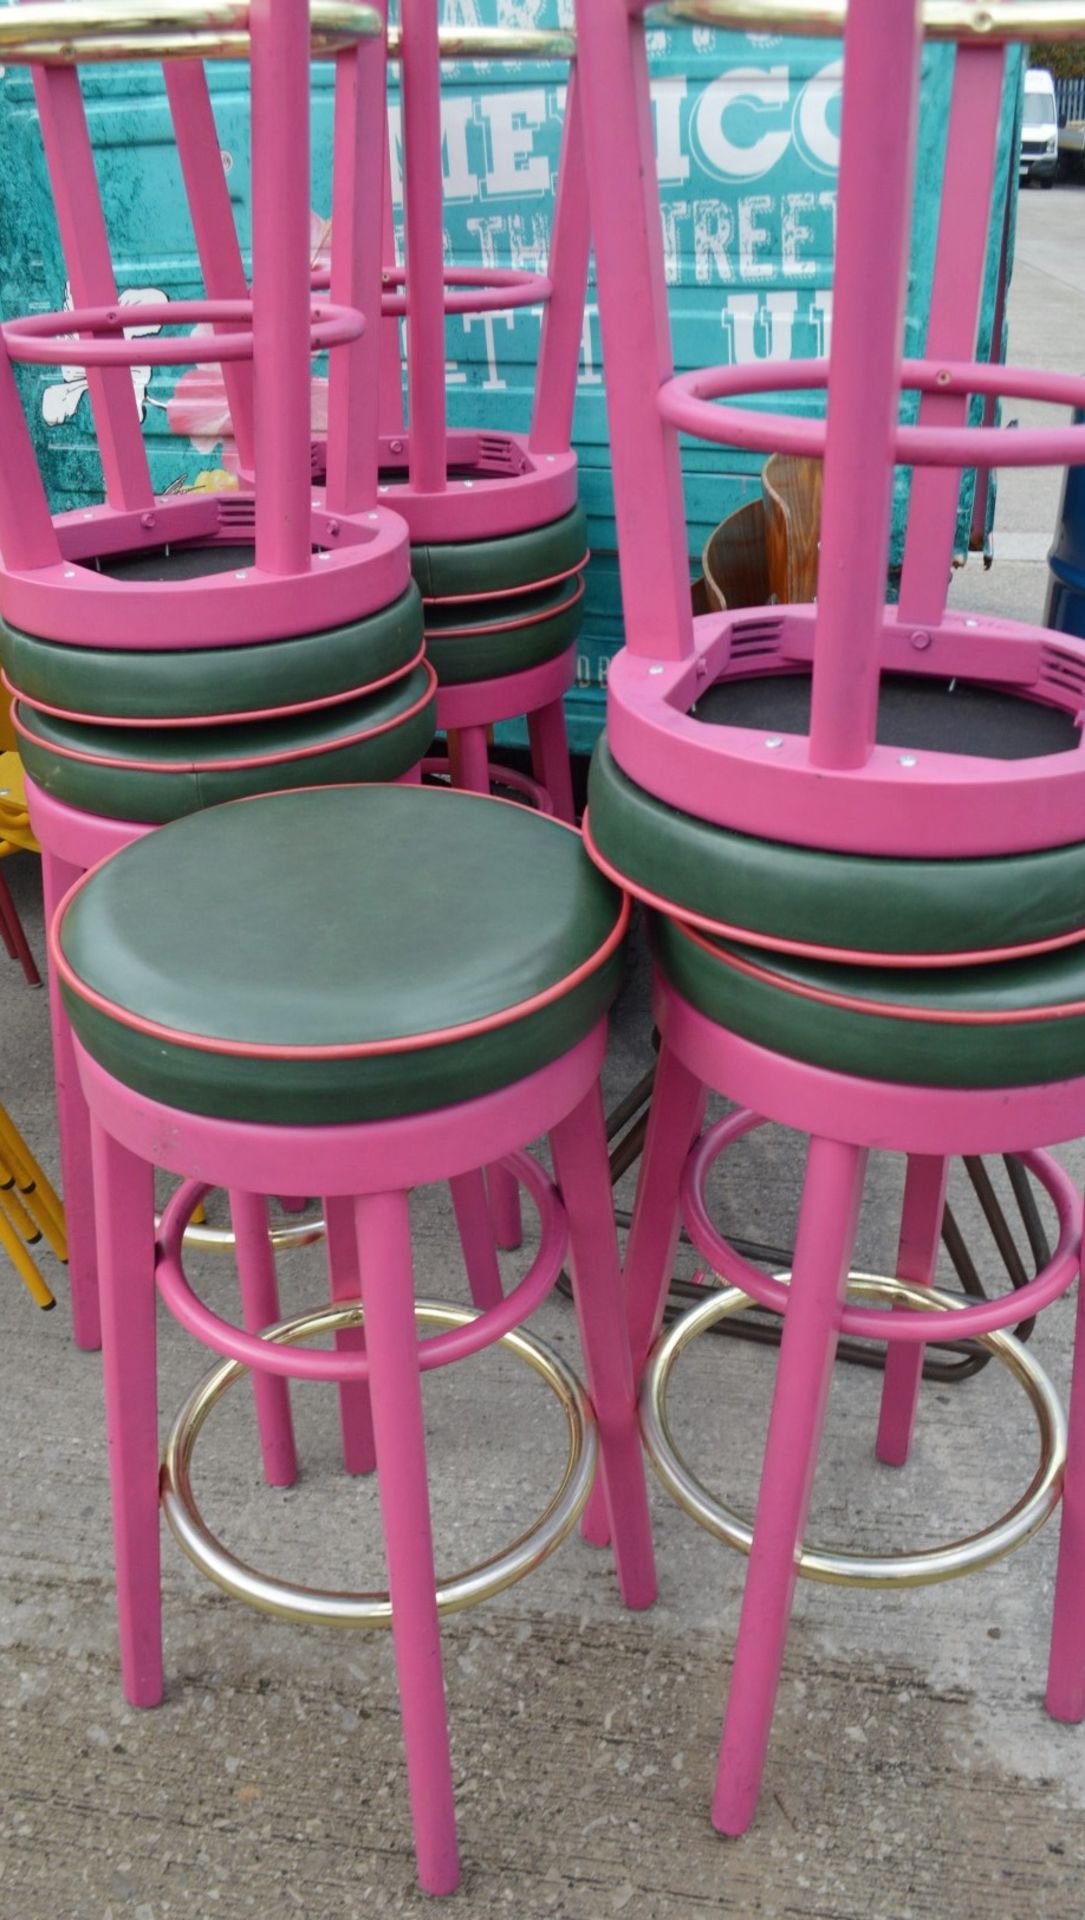 4 x Commercial Bar Stools Featuring Upholstered Seats And A Hot Pink Finish - Image 3 of 3